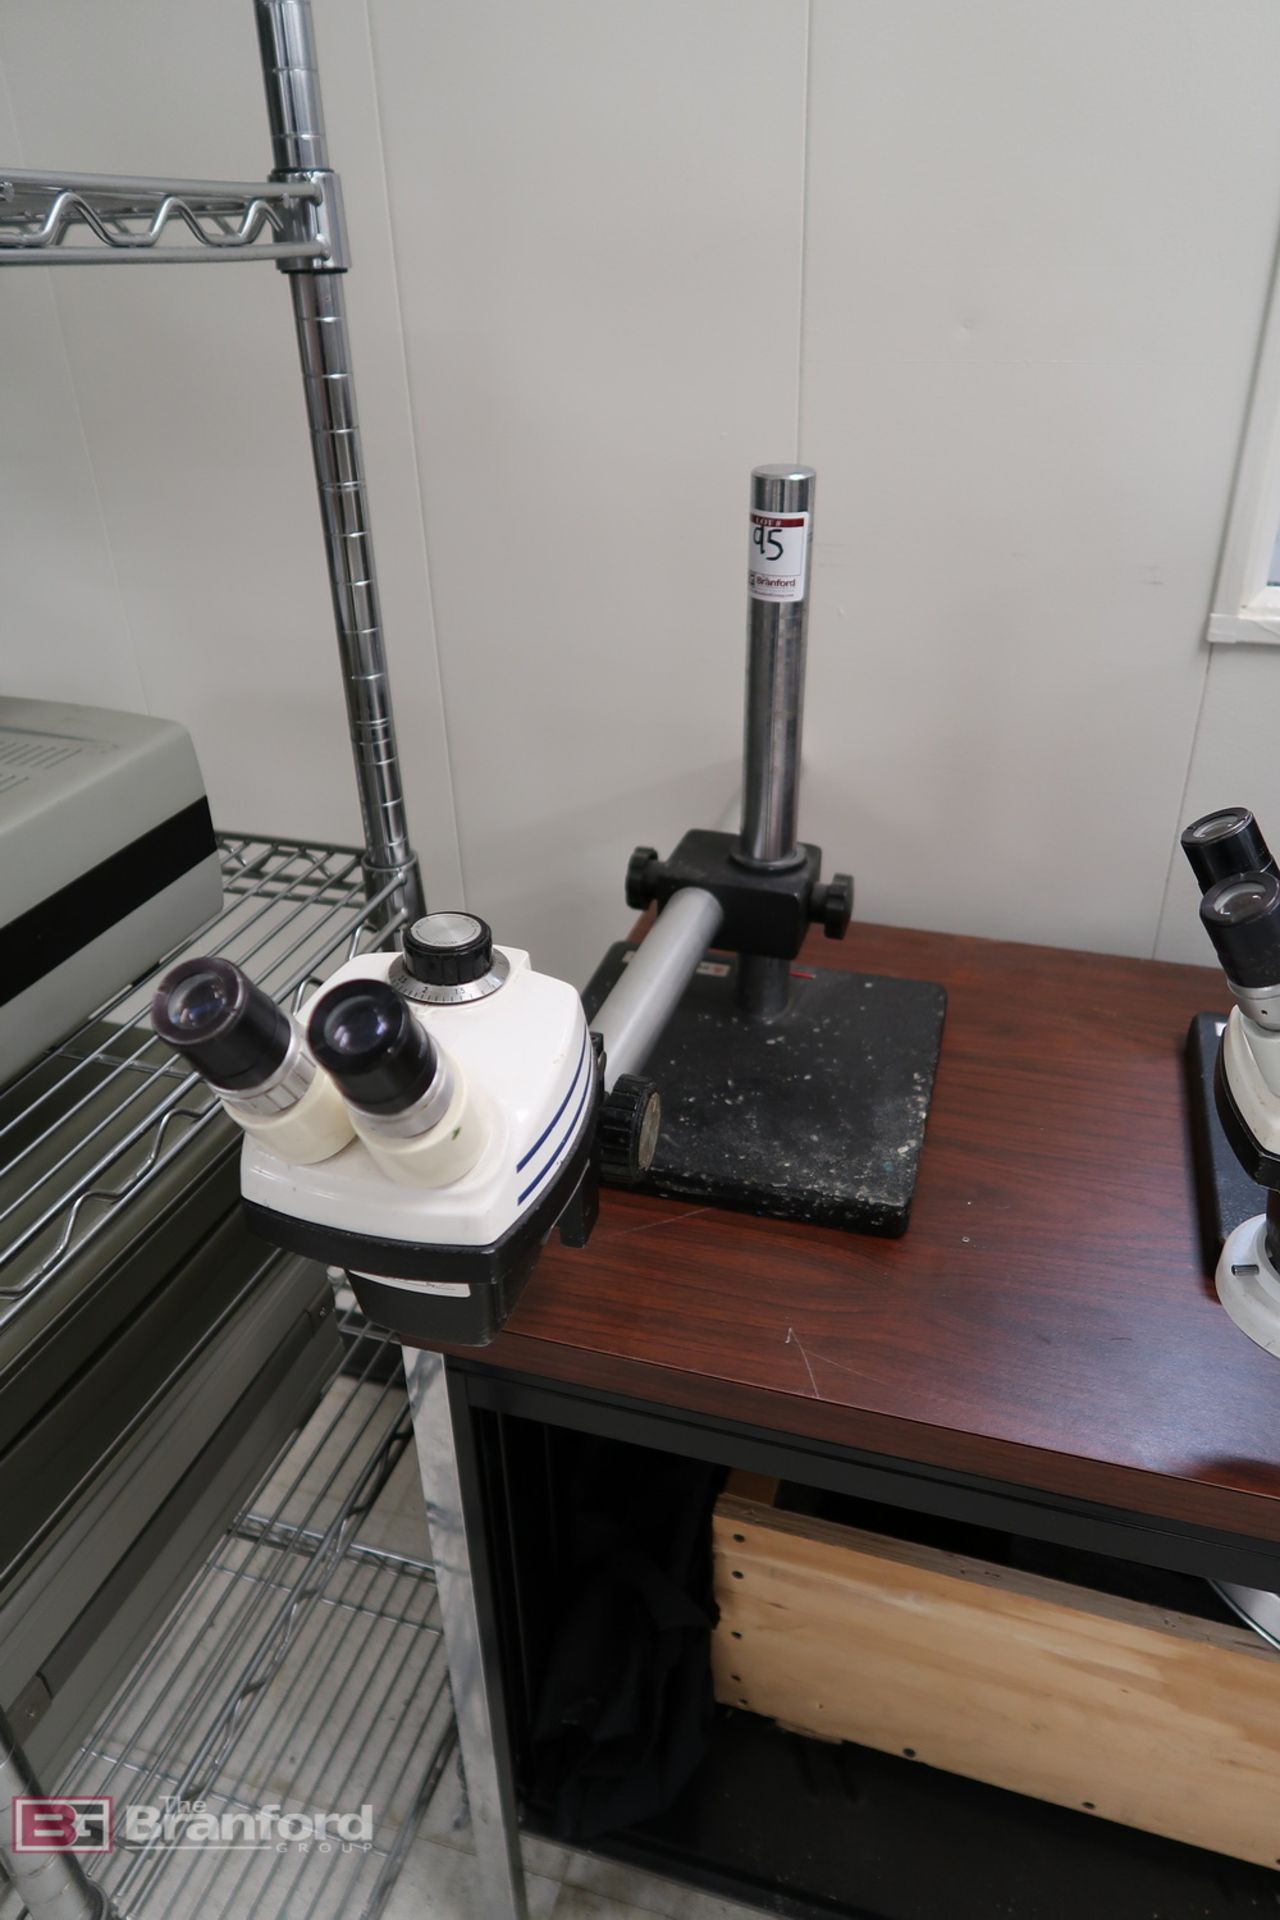 Bausch & Lomb StereoZoom 4 microscope